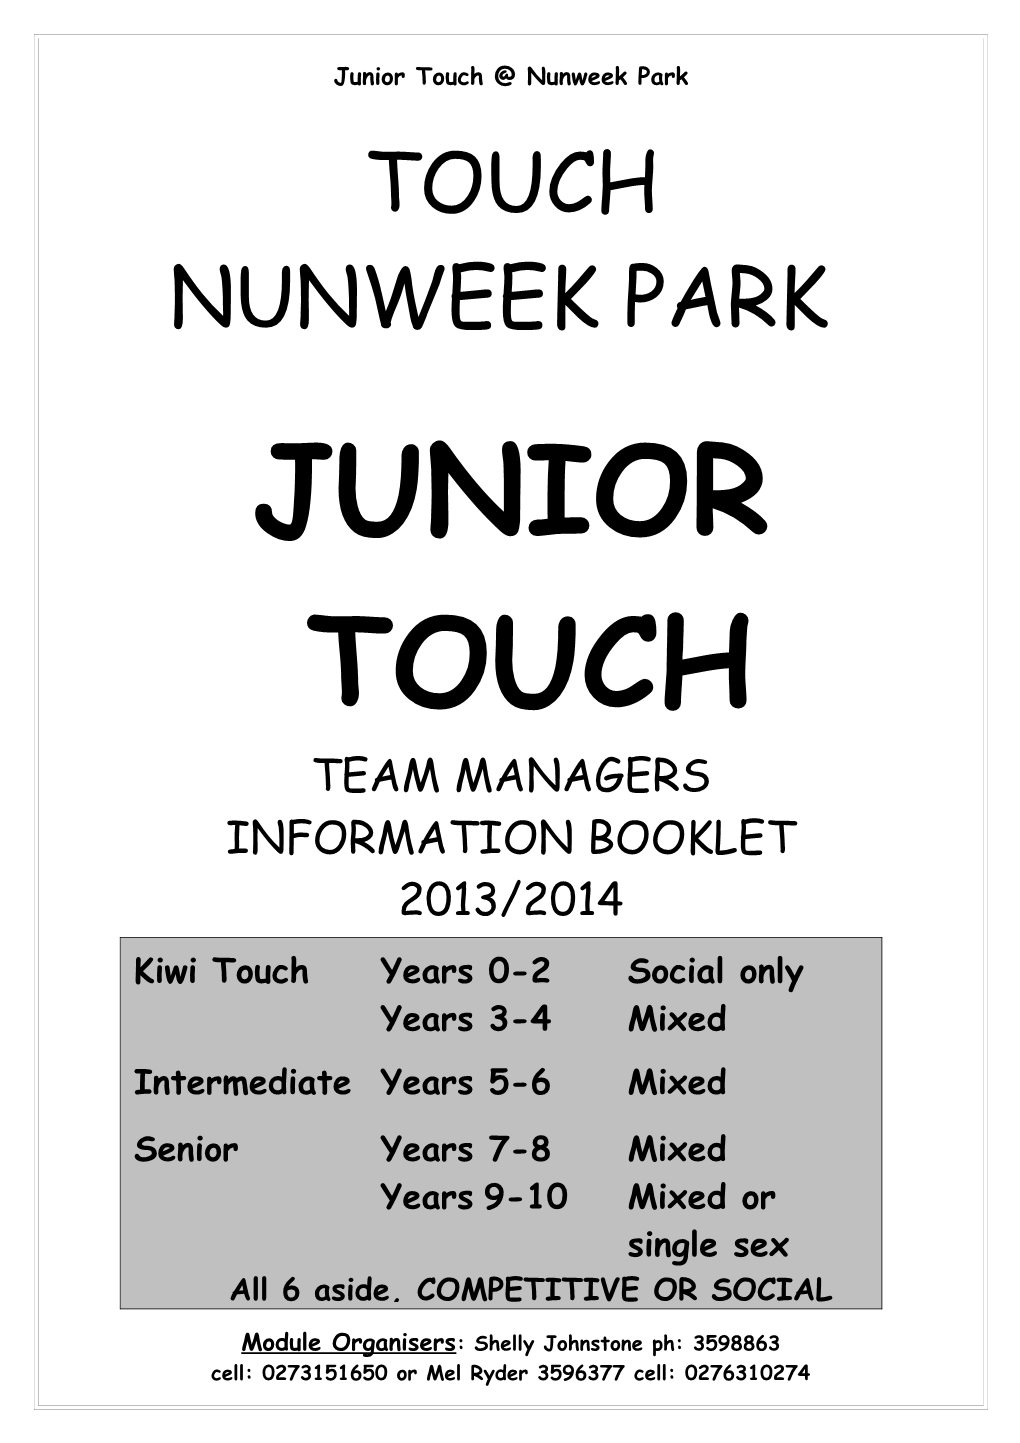 Touch Nunweek Park